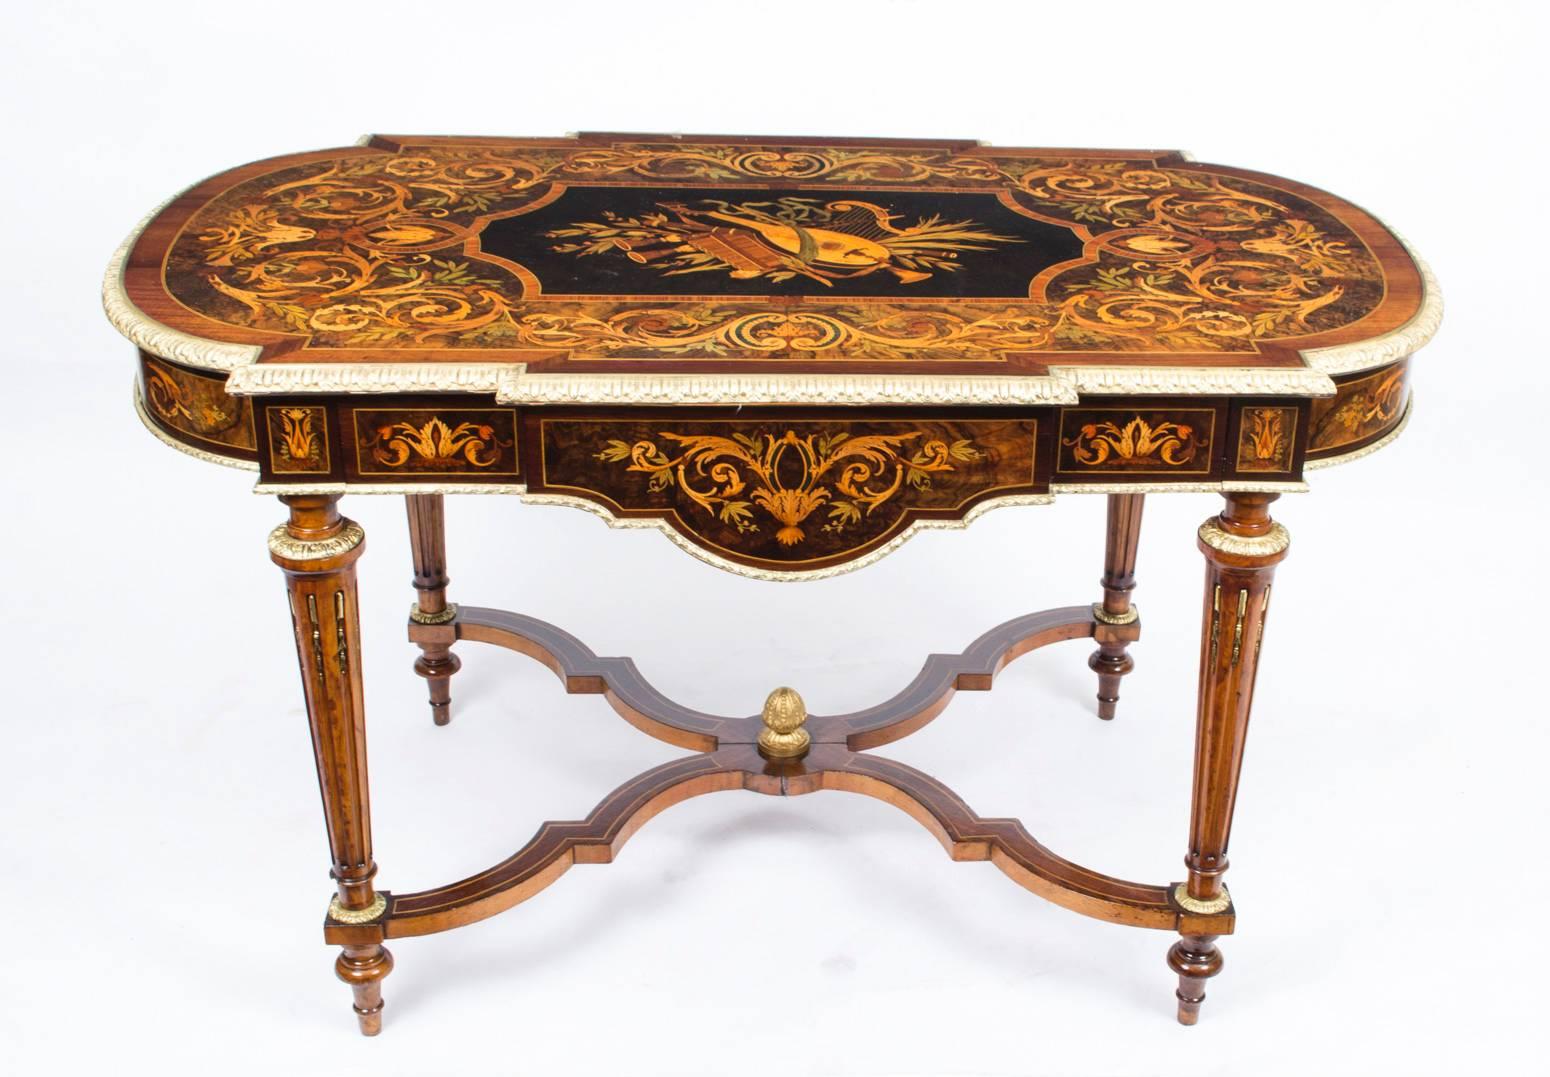 This is a gorgeous antique French ormolu mounted marquetry burr walnut, bureau plat or centre table, circa 1850 in date.

This fabulous table features beautiful marquetry decoration of walnut, gonzalo alves and purple heart with elegant ormolu